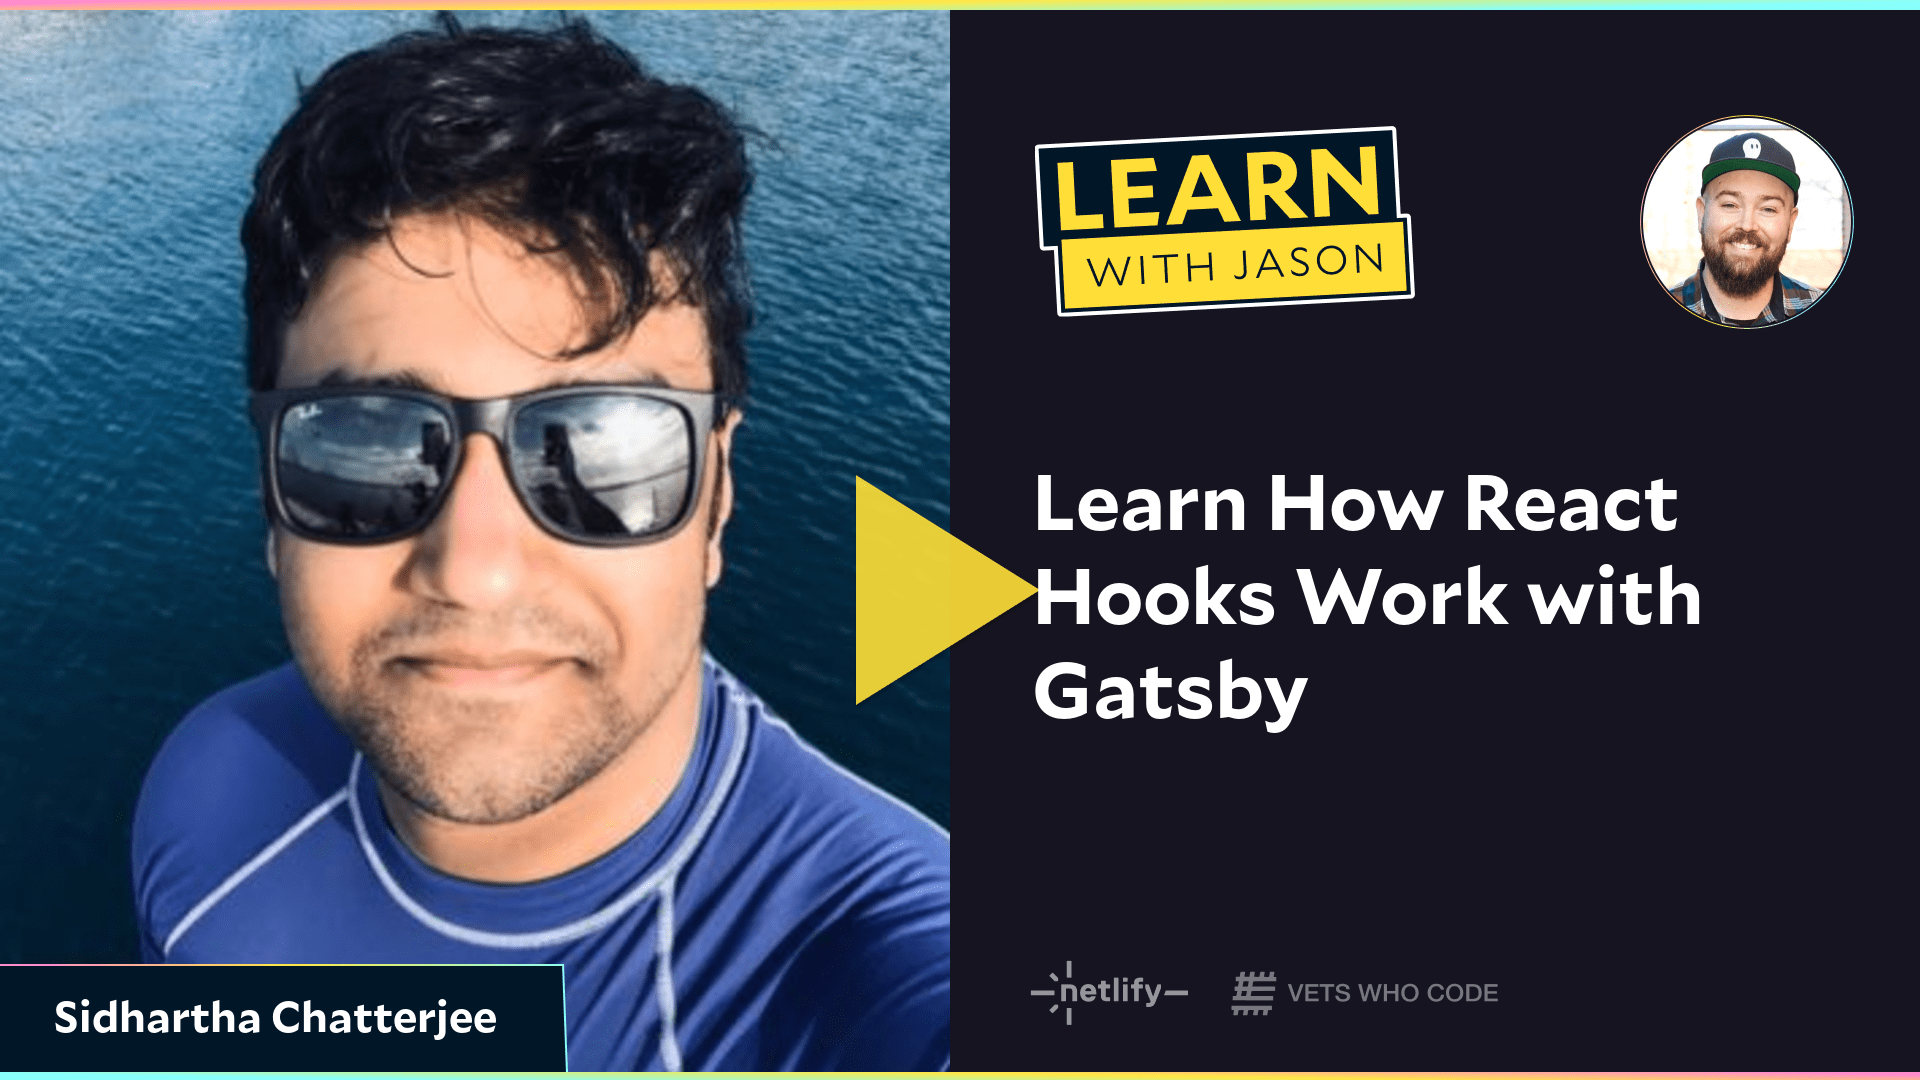 Learn How React Hooks Work with Gatsby (with Sidhartha Chatterjee)